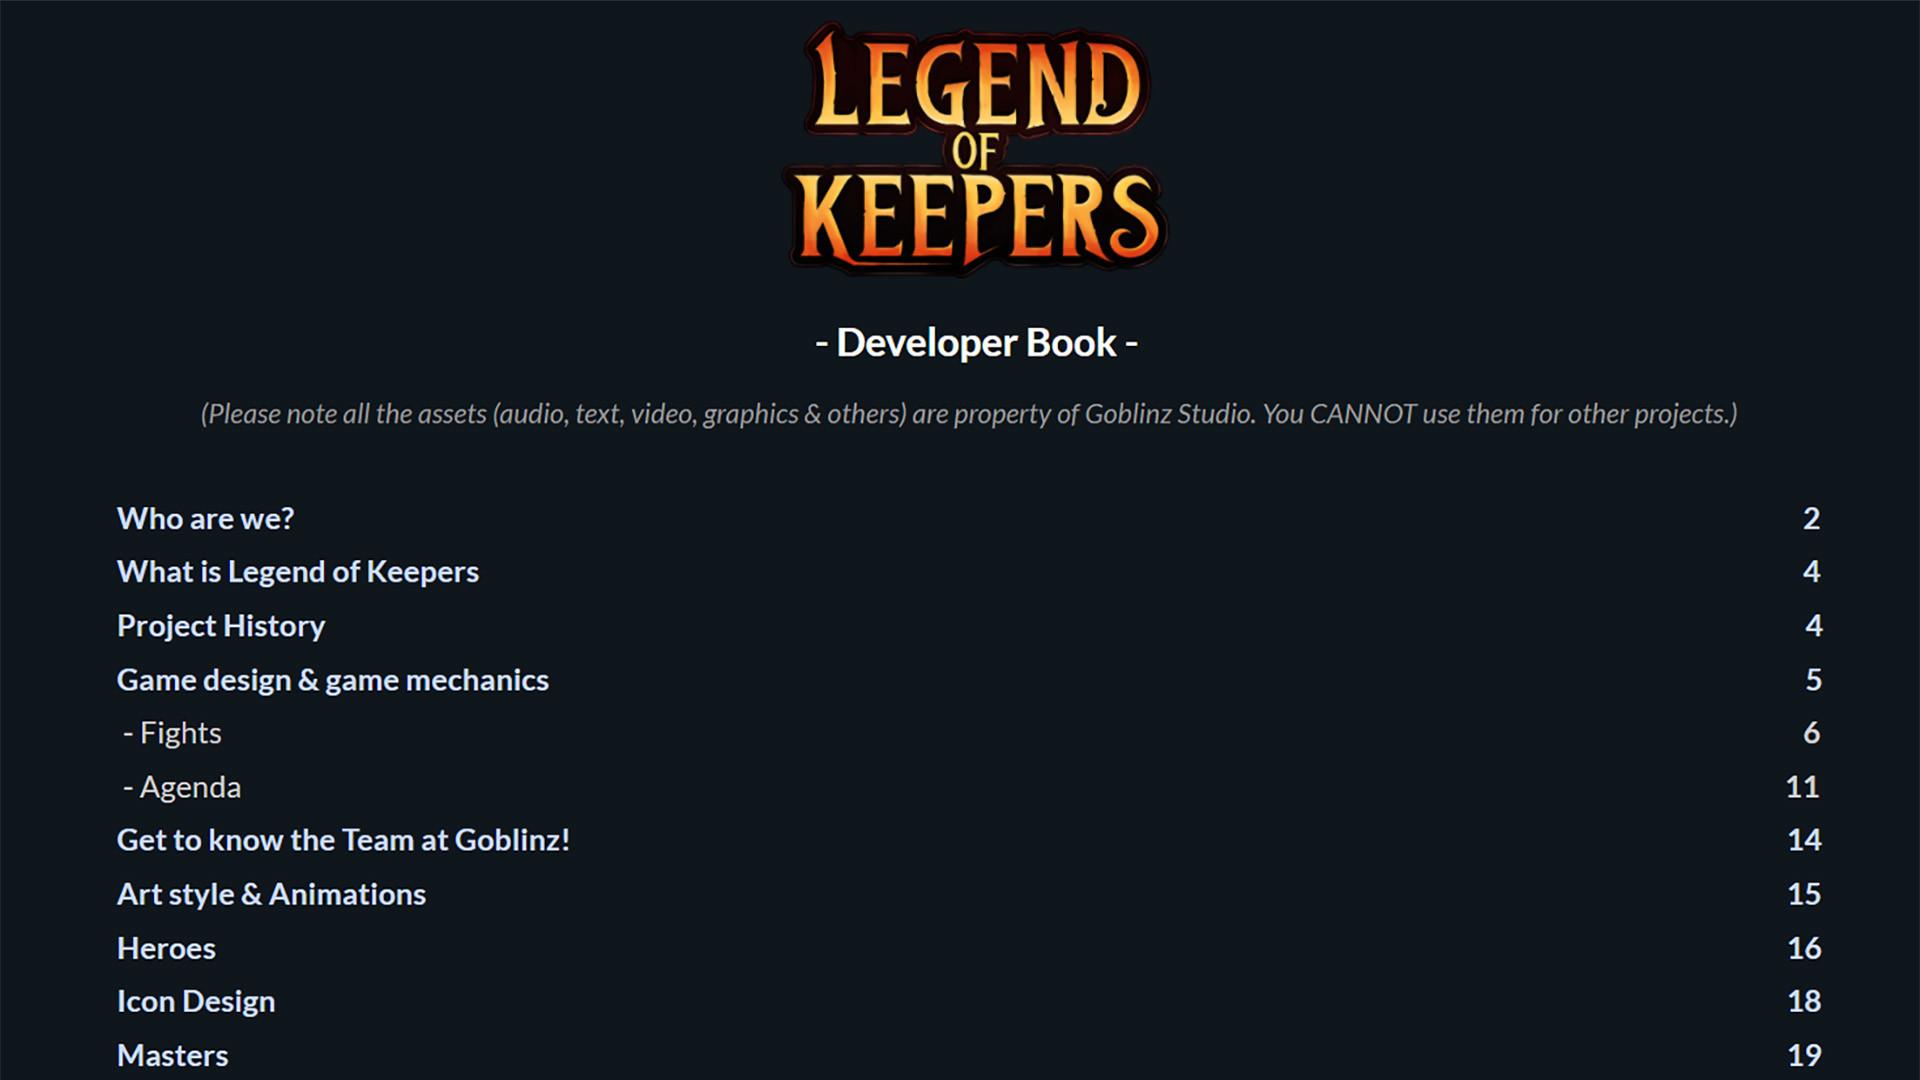 Legend of Keepers - Supporter Pack